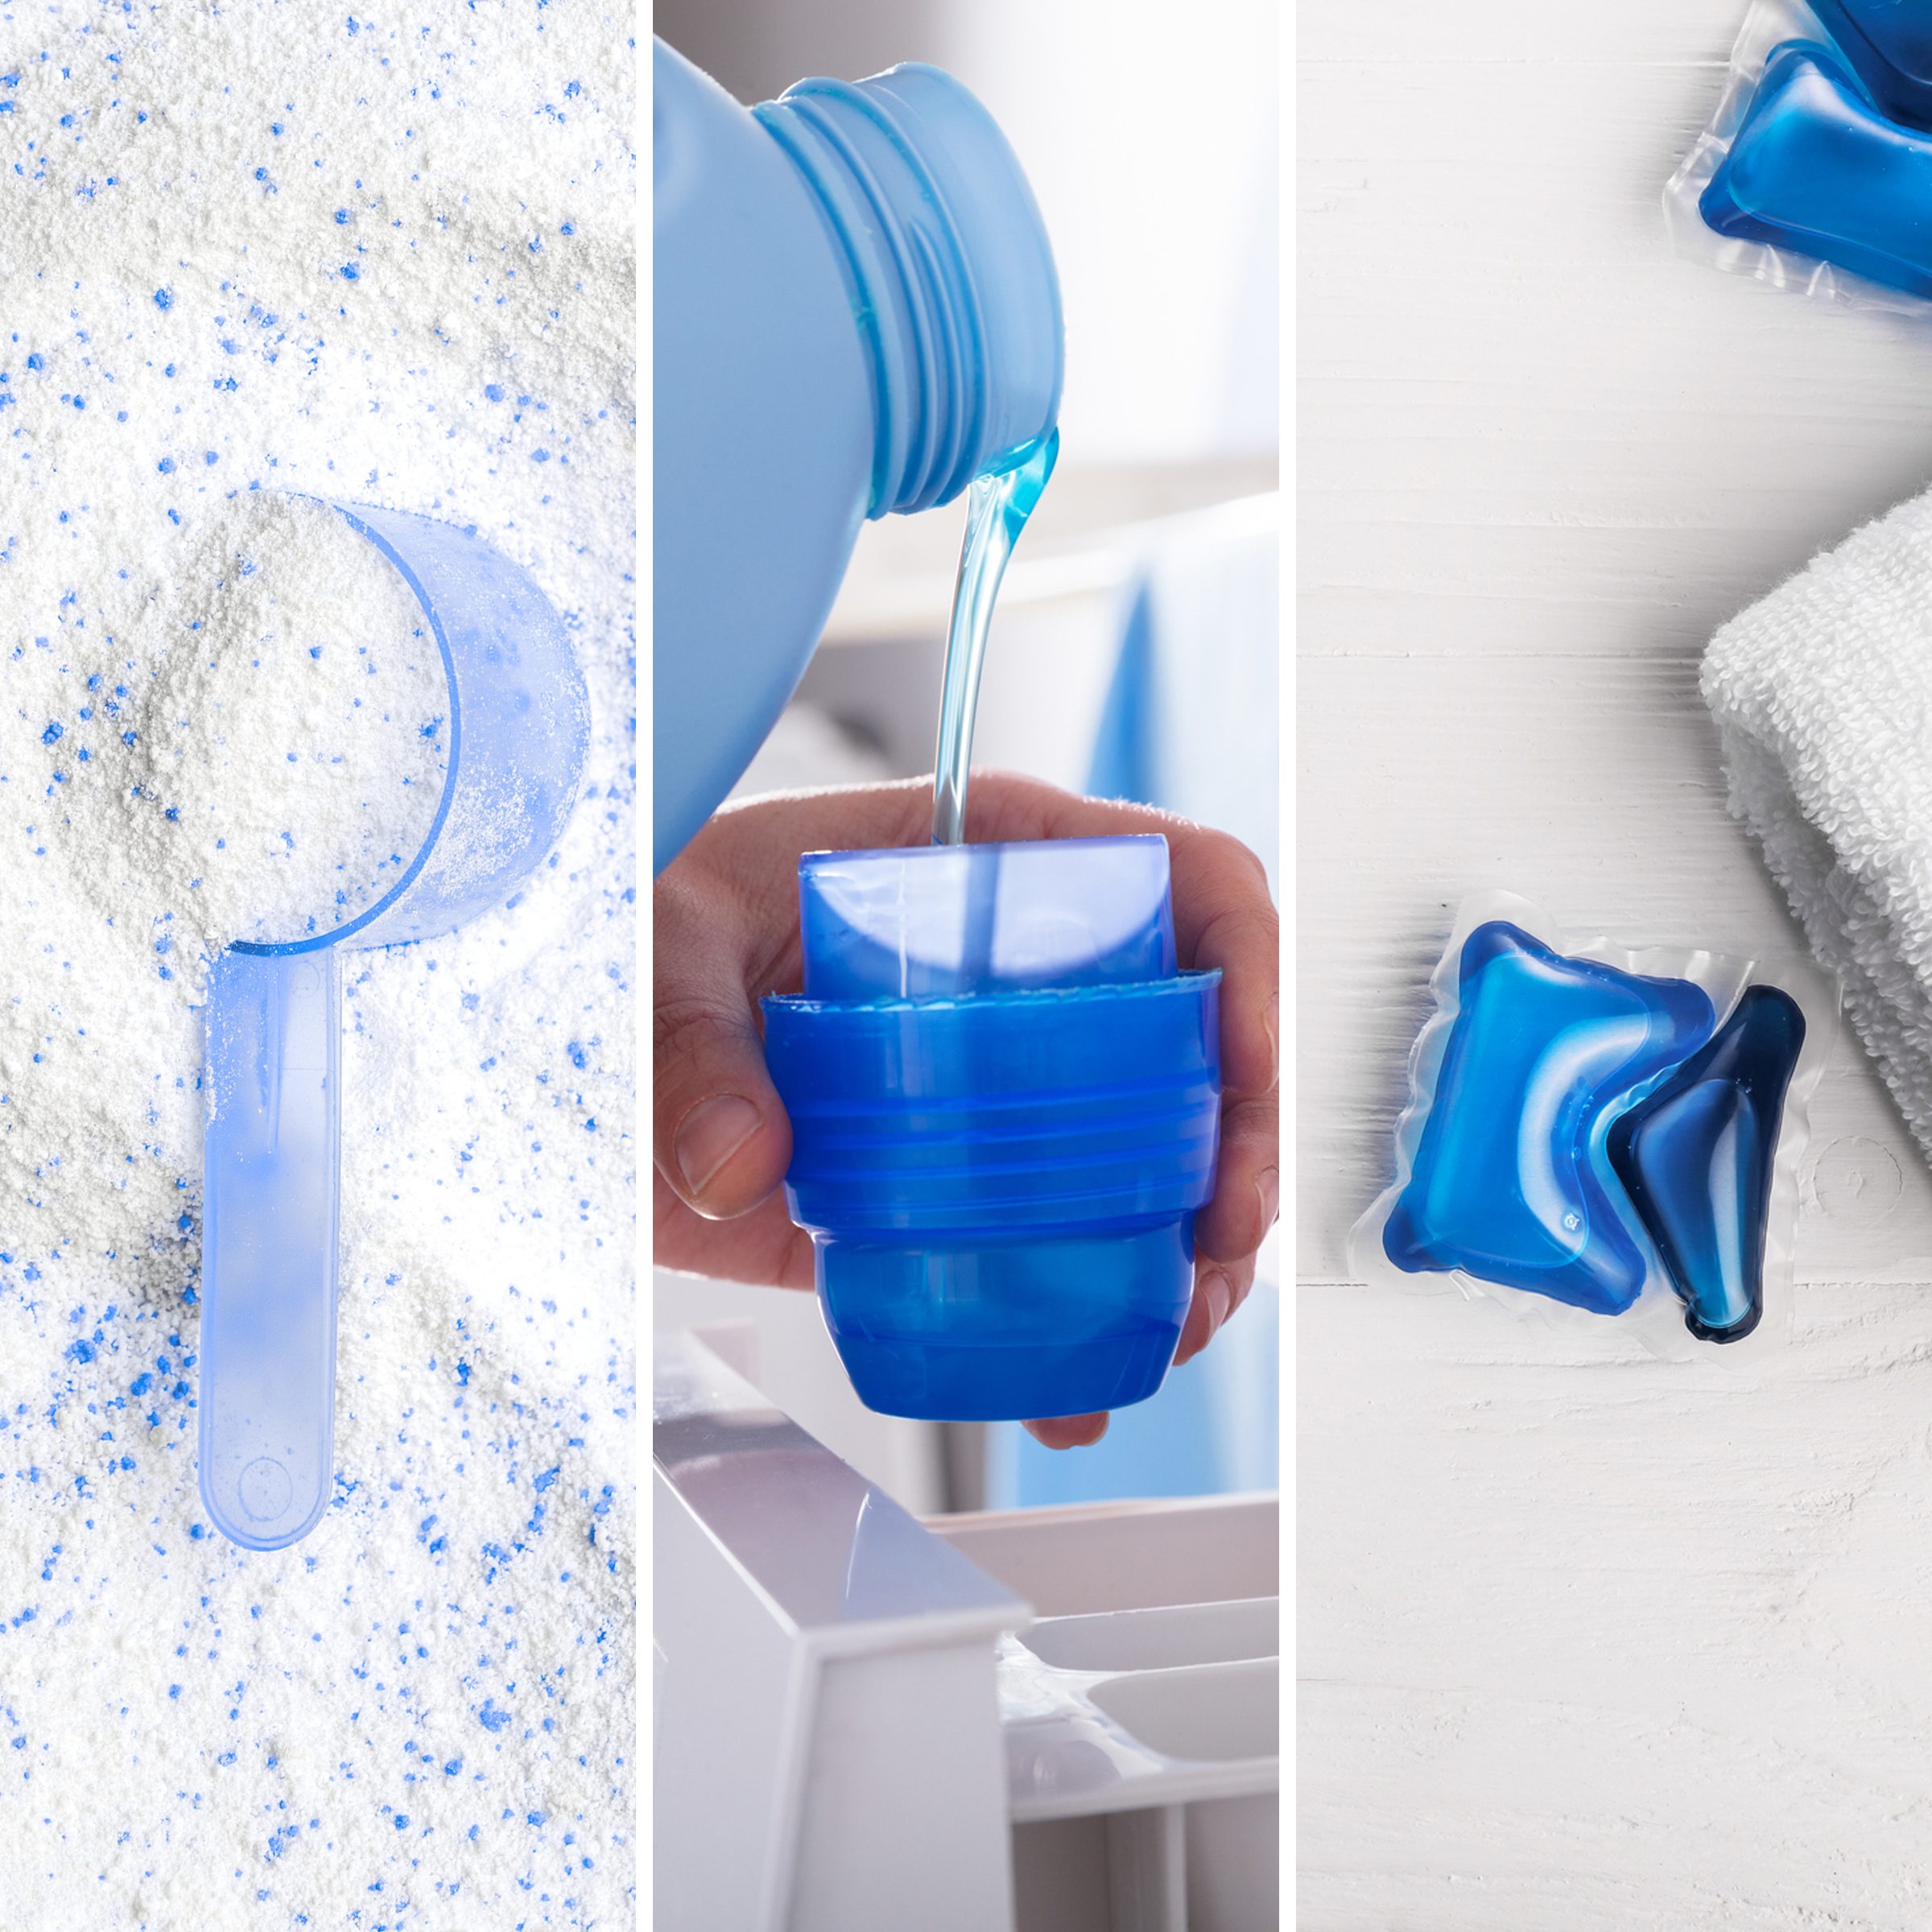 What Can You Use Instead of a Dosing Ball for Liquid Detergent?